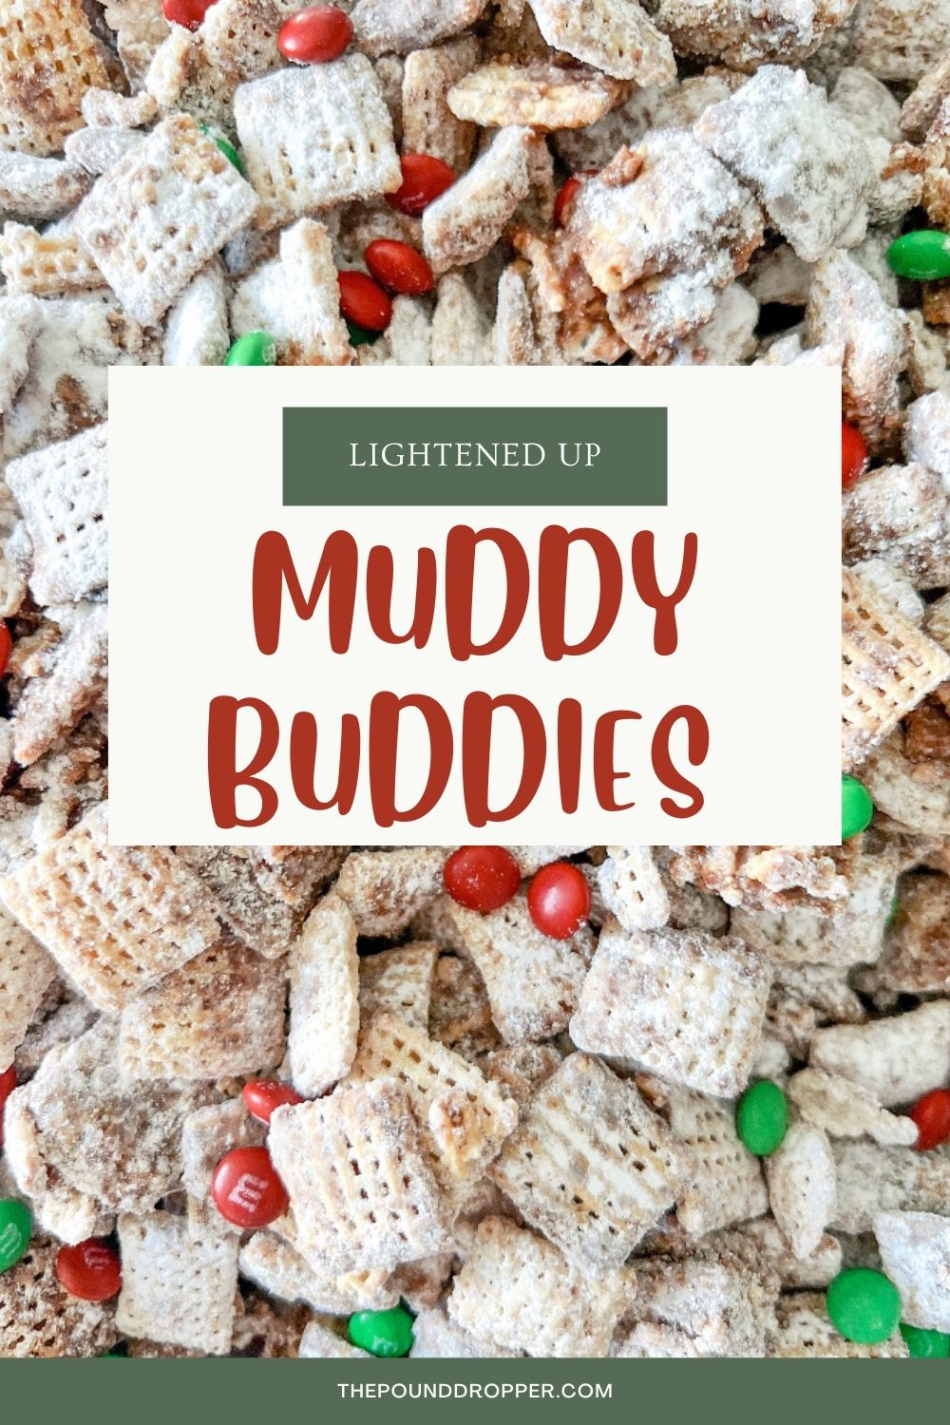 These Lightened Up Muddy Buddies are a favorite treat during the holidays- also known as Puppy Chow- it's a sweet crunchy, peanut buttery, chocolate treat that everyone loves! via @pounddropper